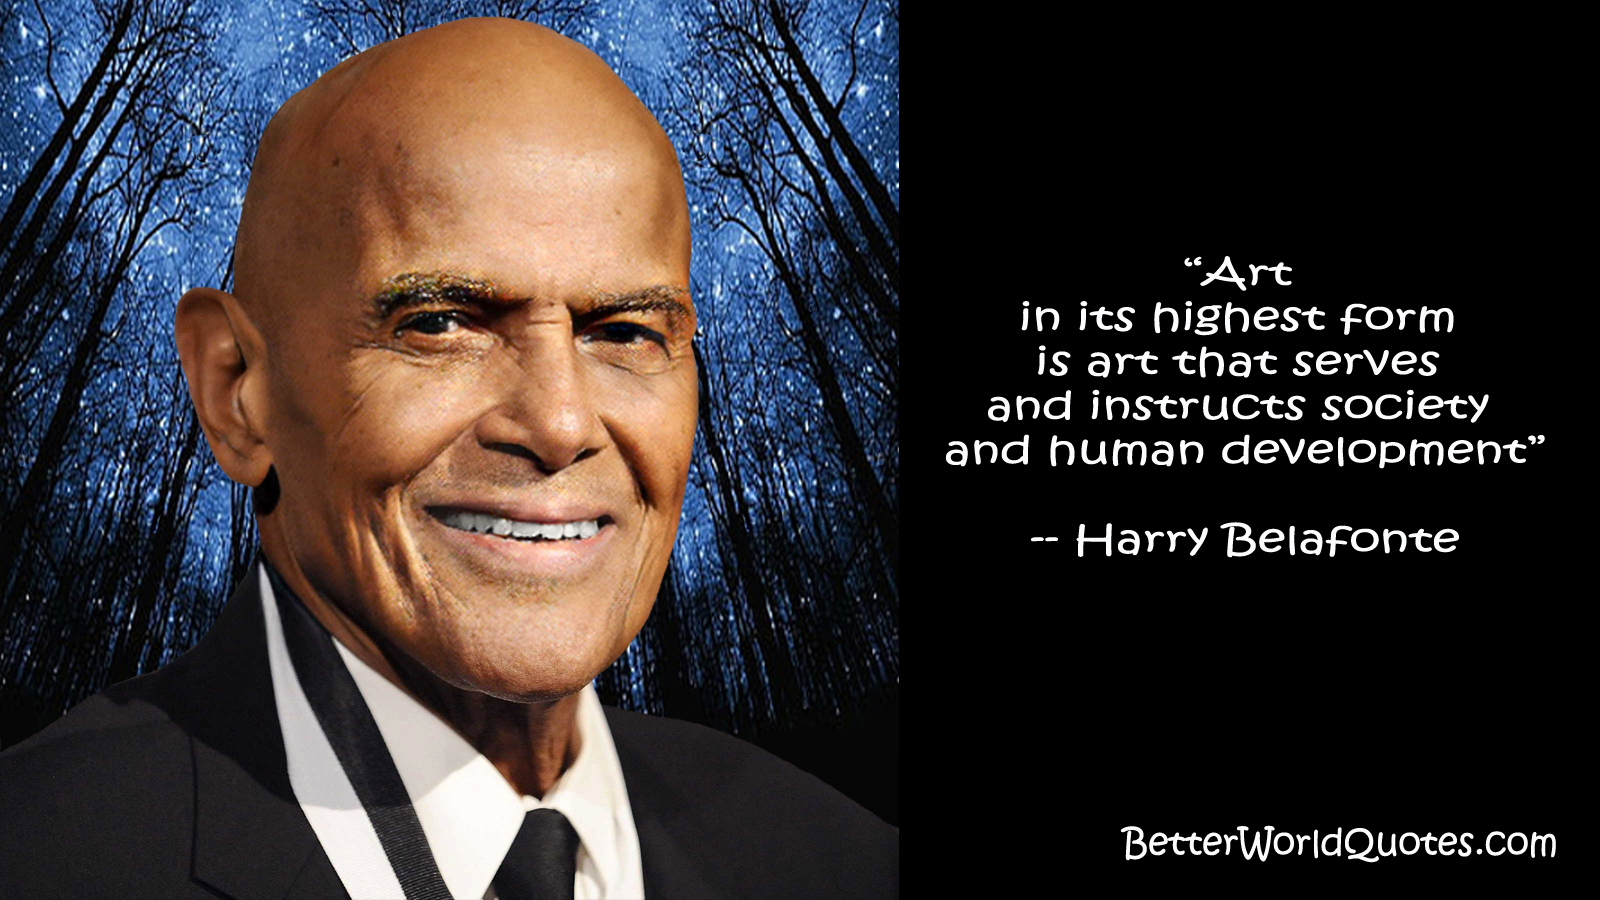 Harry Belafonte: Art in its highest form is art that serves and instructs society and human development.